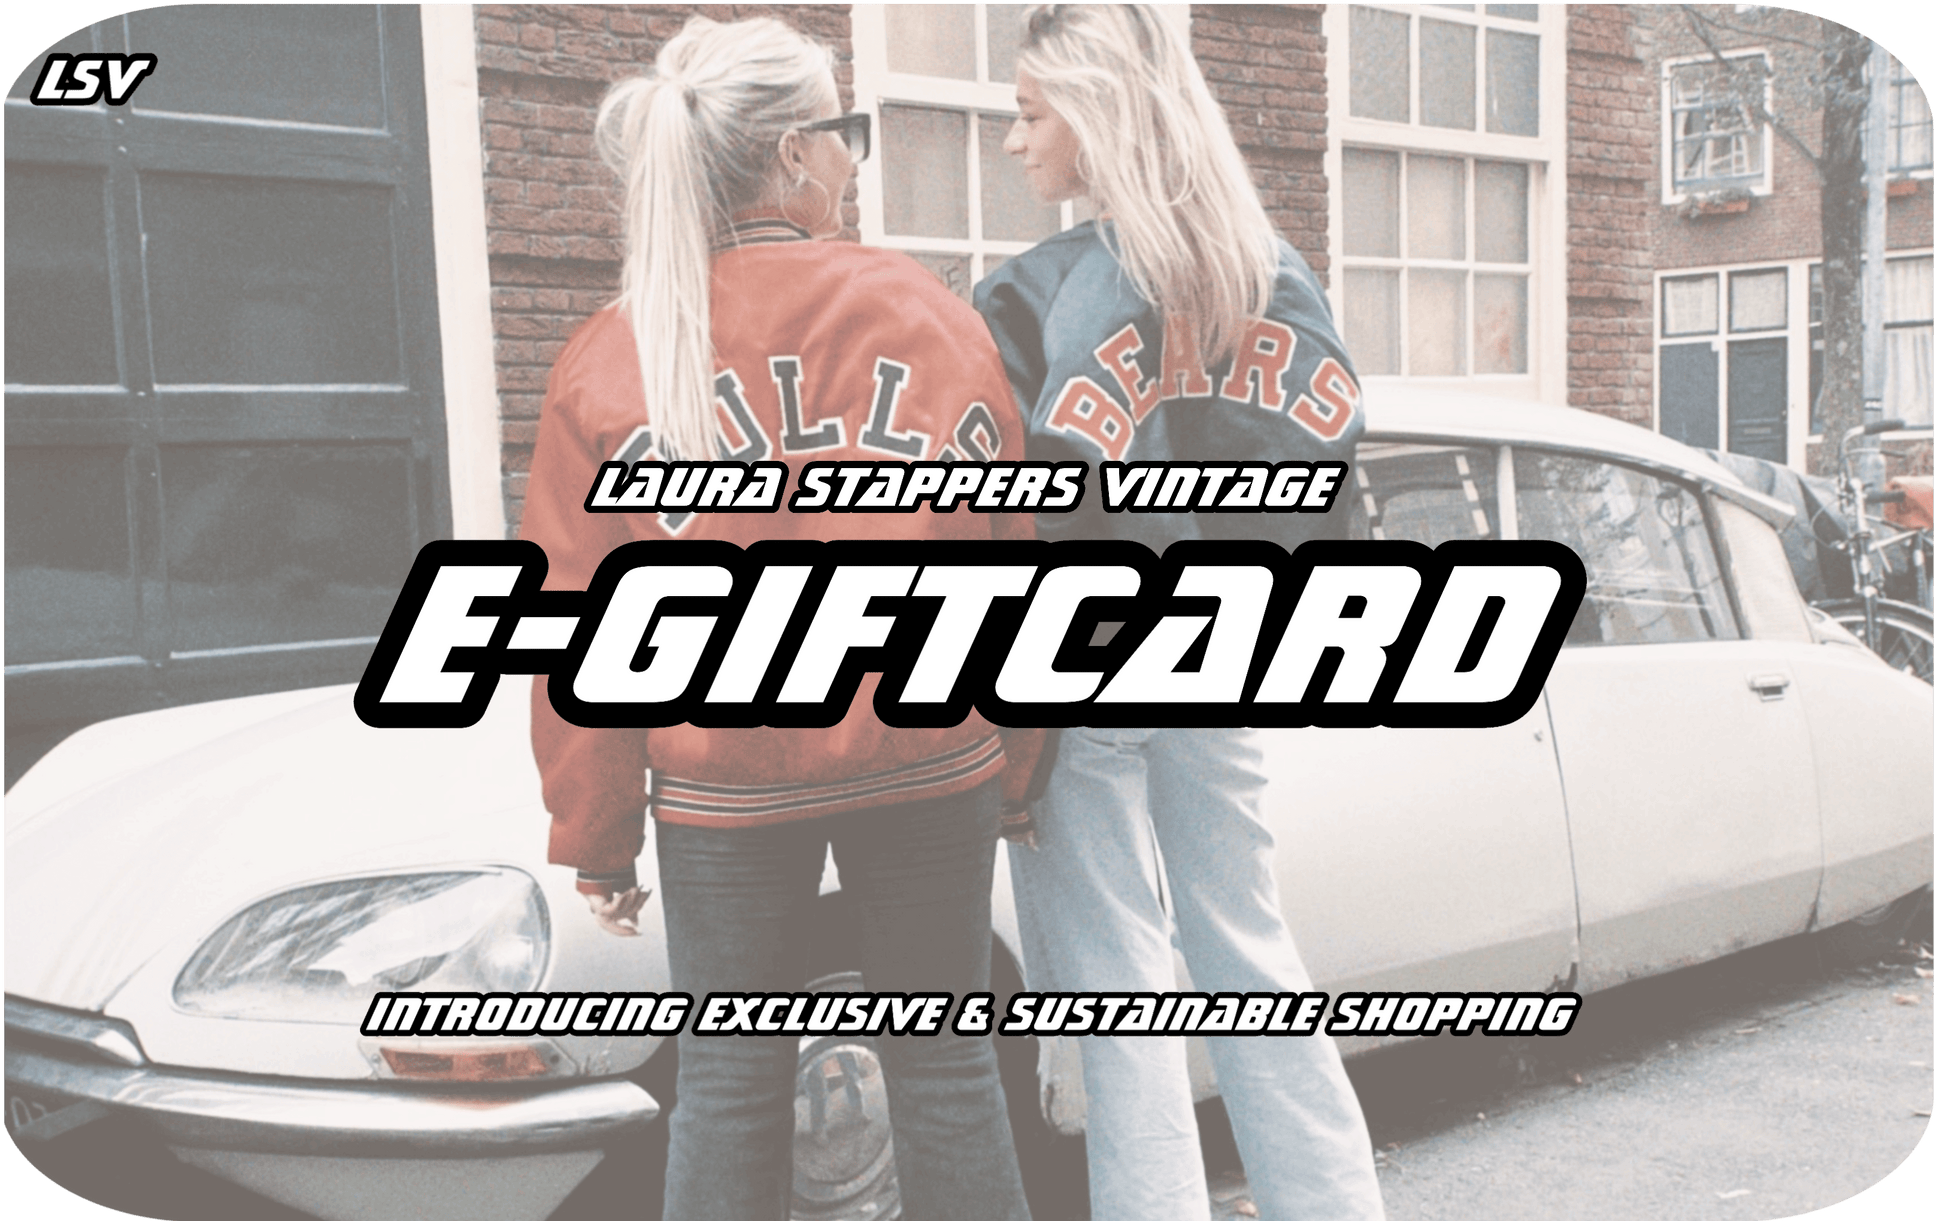 Laura Stappers Vintage e-giftcard | LSV